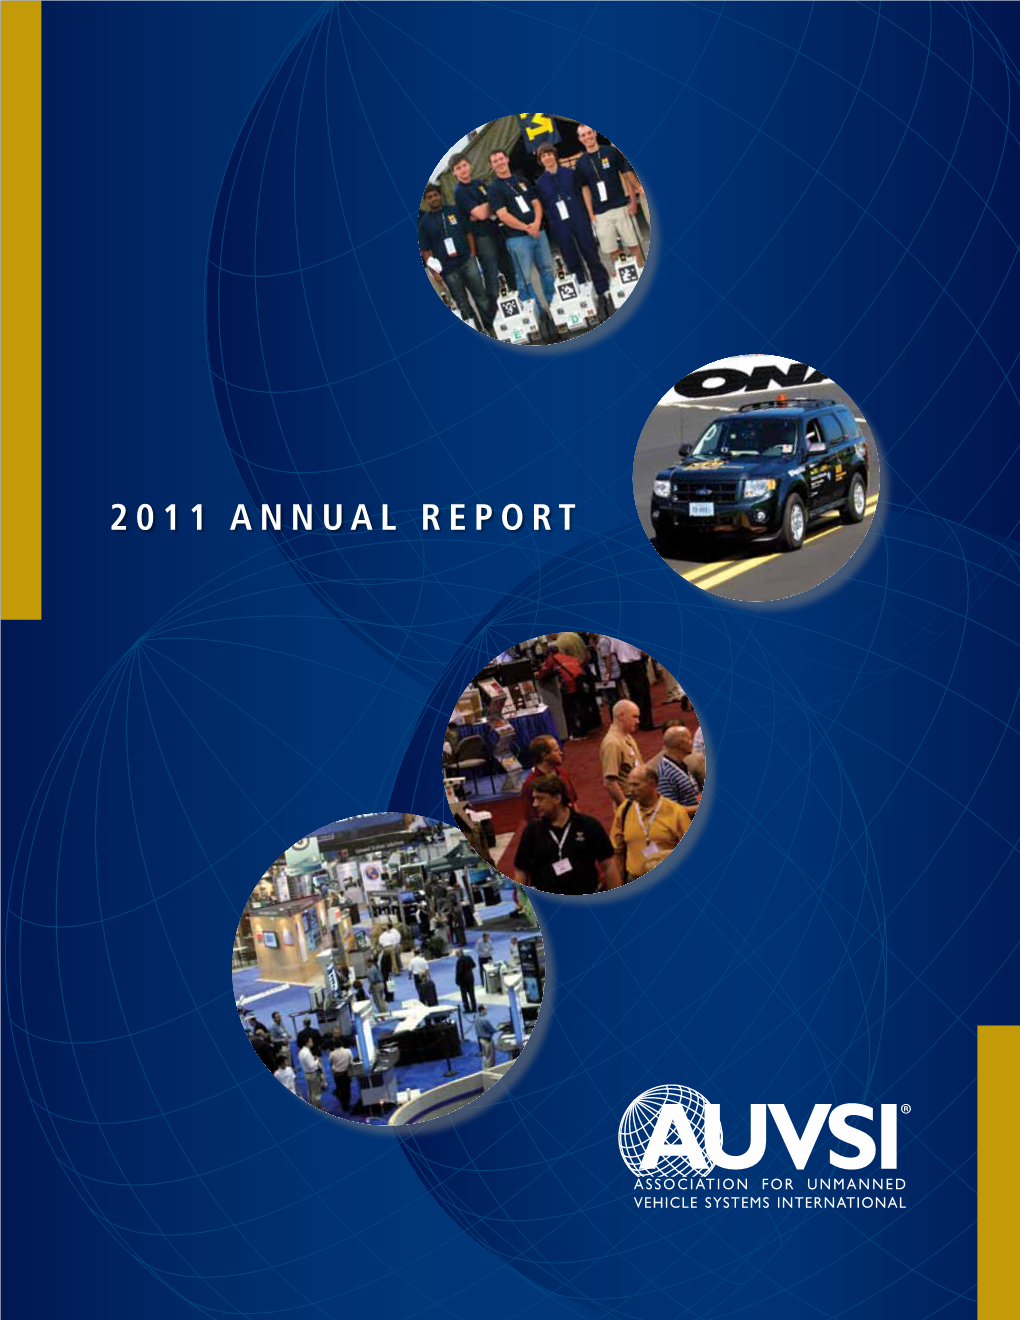 2011 Annual Report MESSAGE from AUVSI PRESIDENT & CEO, MICHAEL TOSCANO